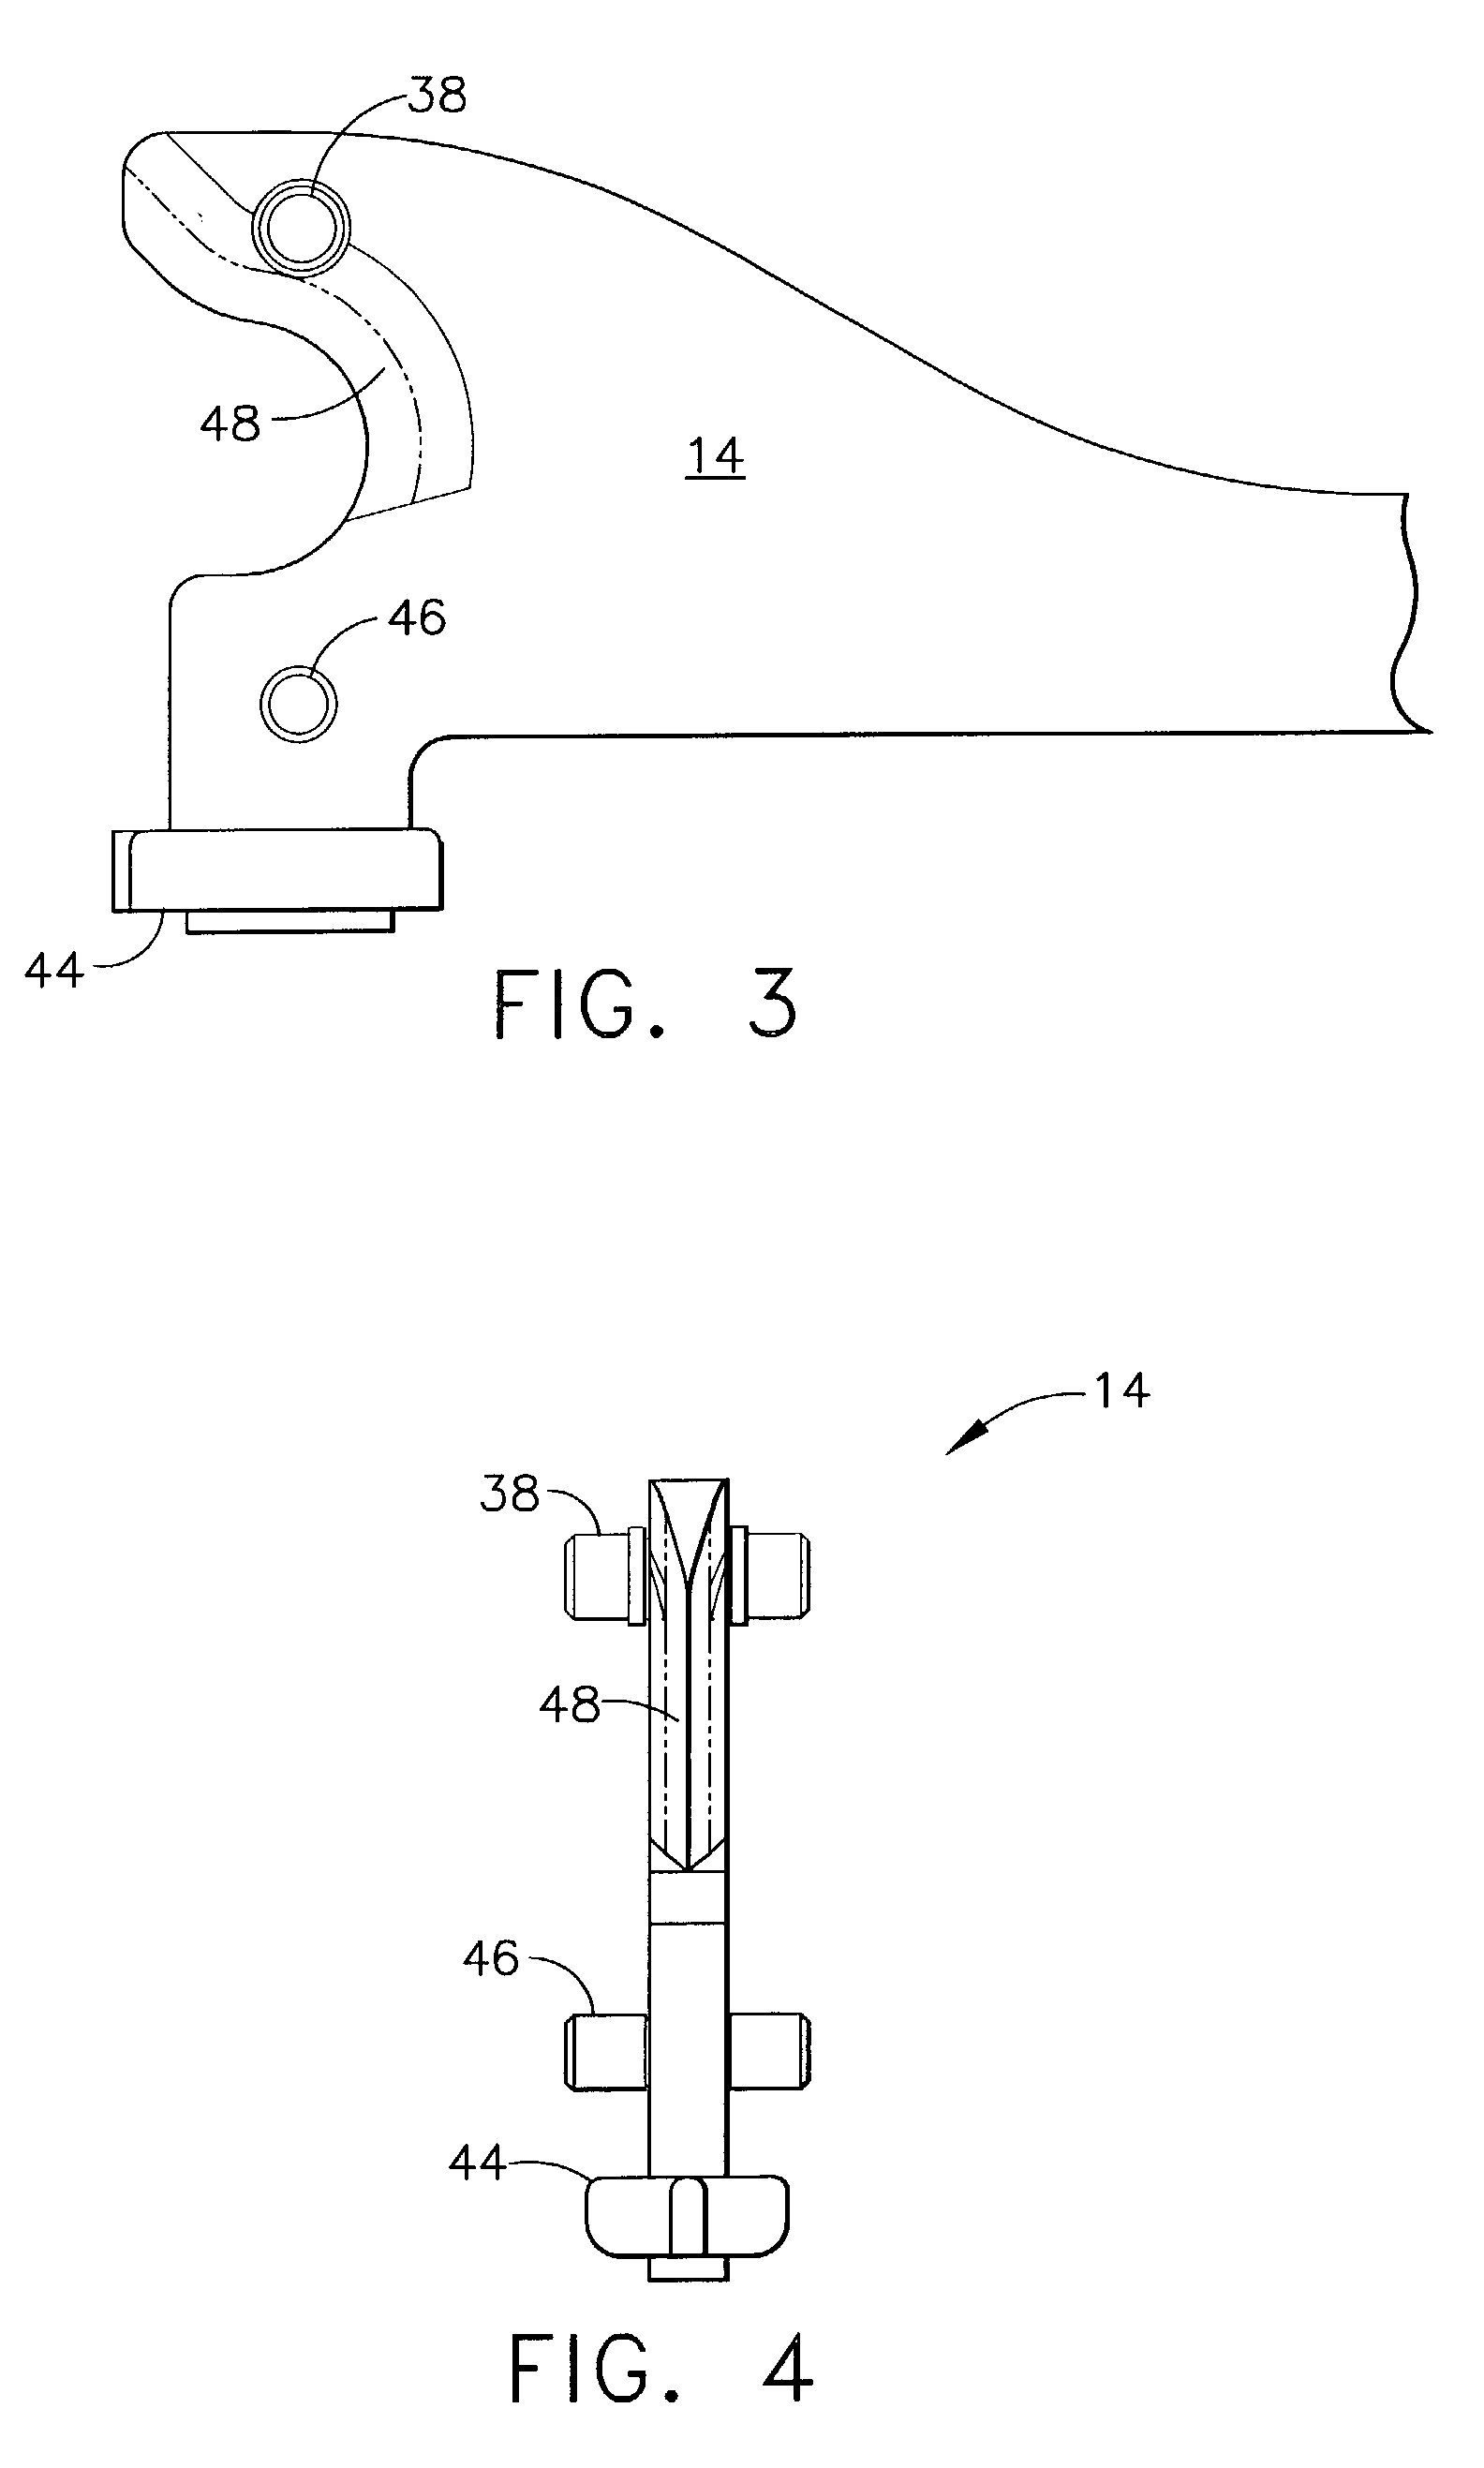 Surgical stapling instrument having separate distinct closing and firing systems